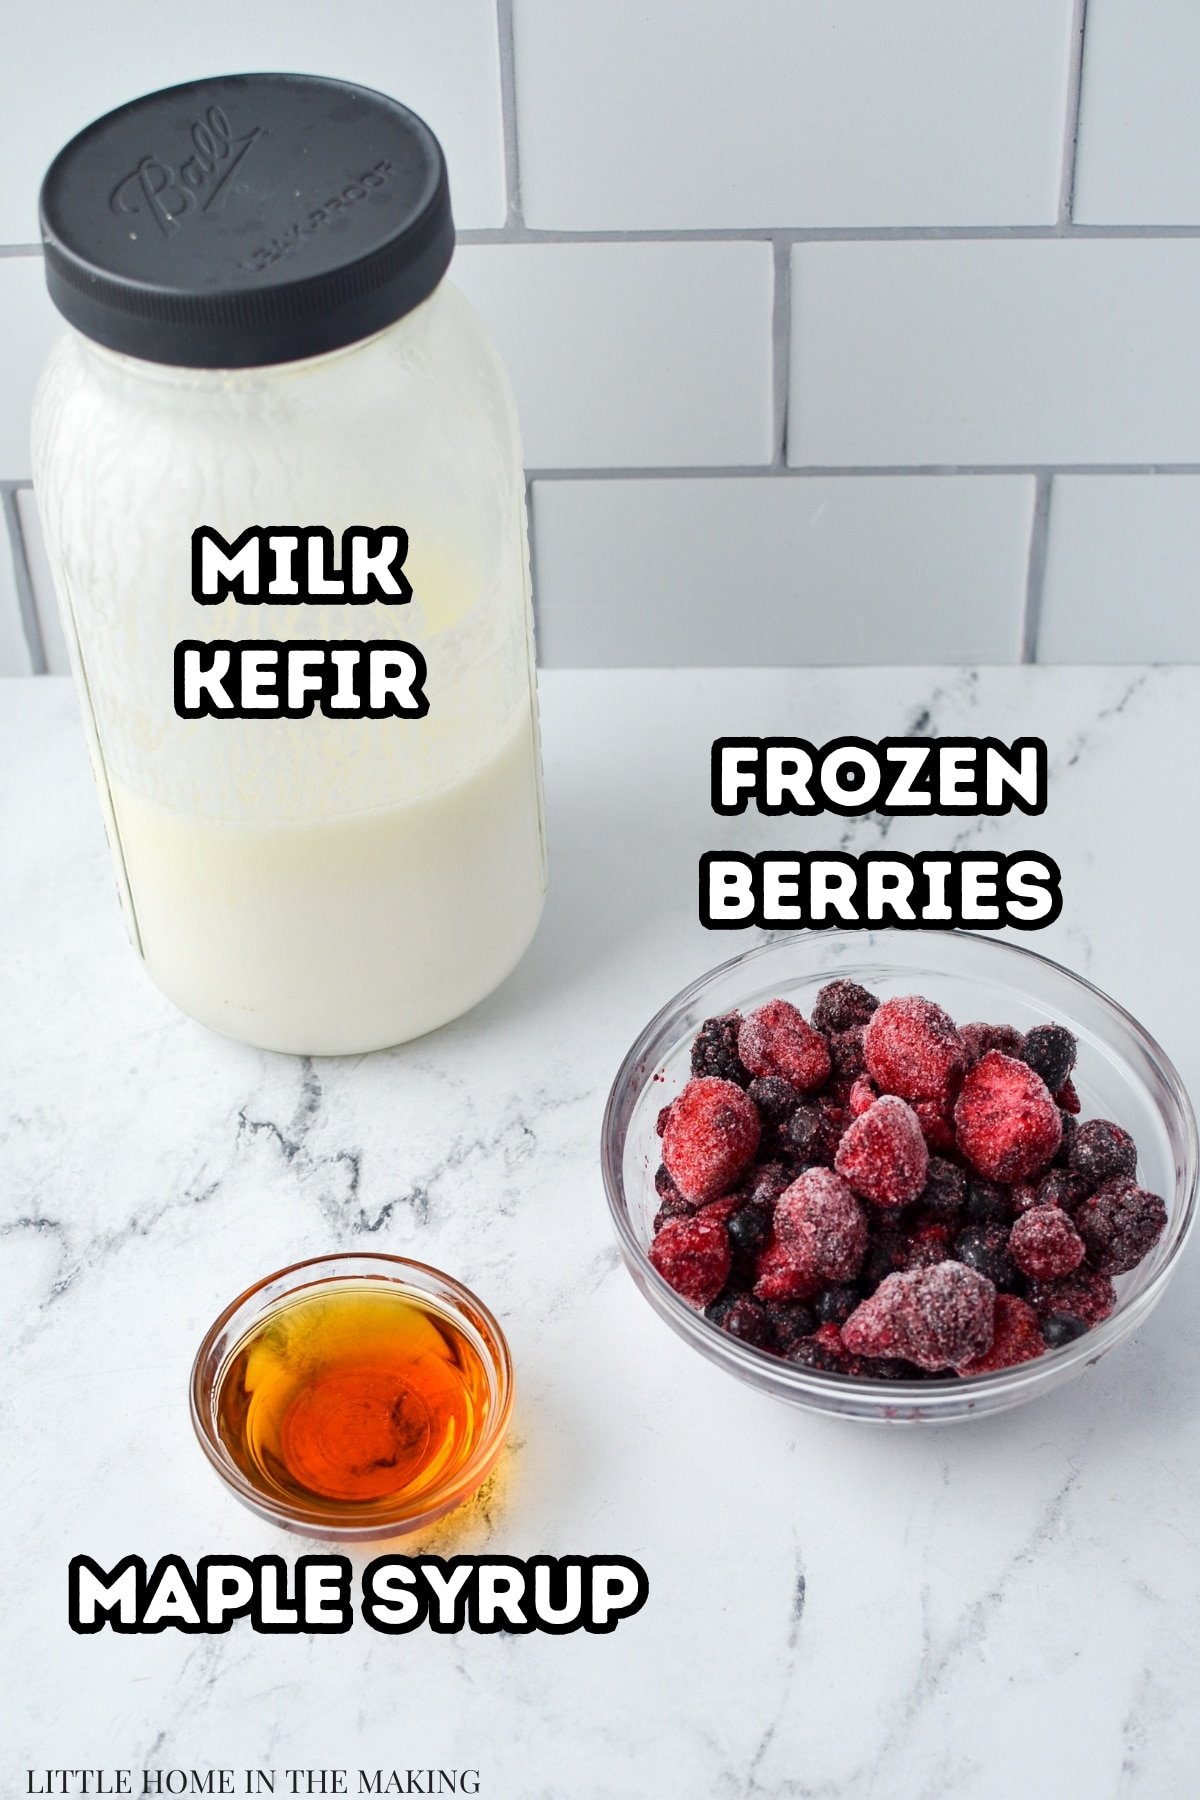 A jar of milk kefir, a bowl of frozen berries, and a small bowl filled with maple syrup.